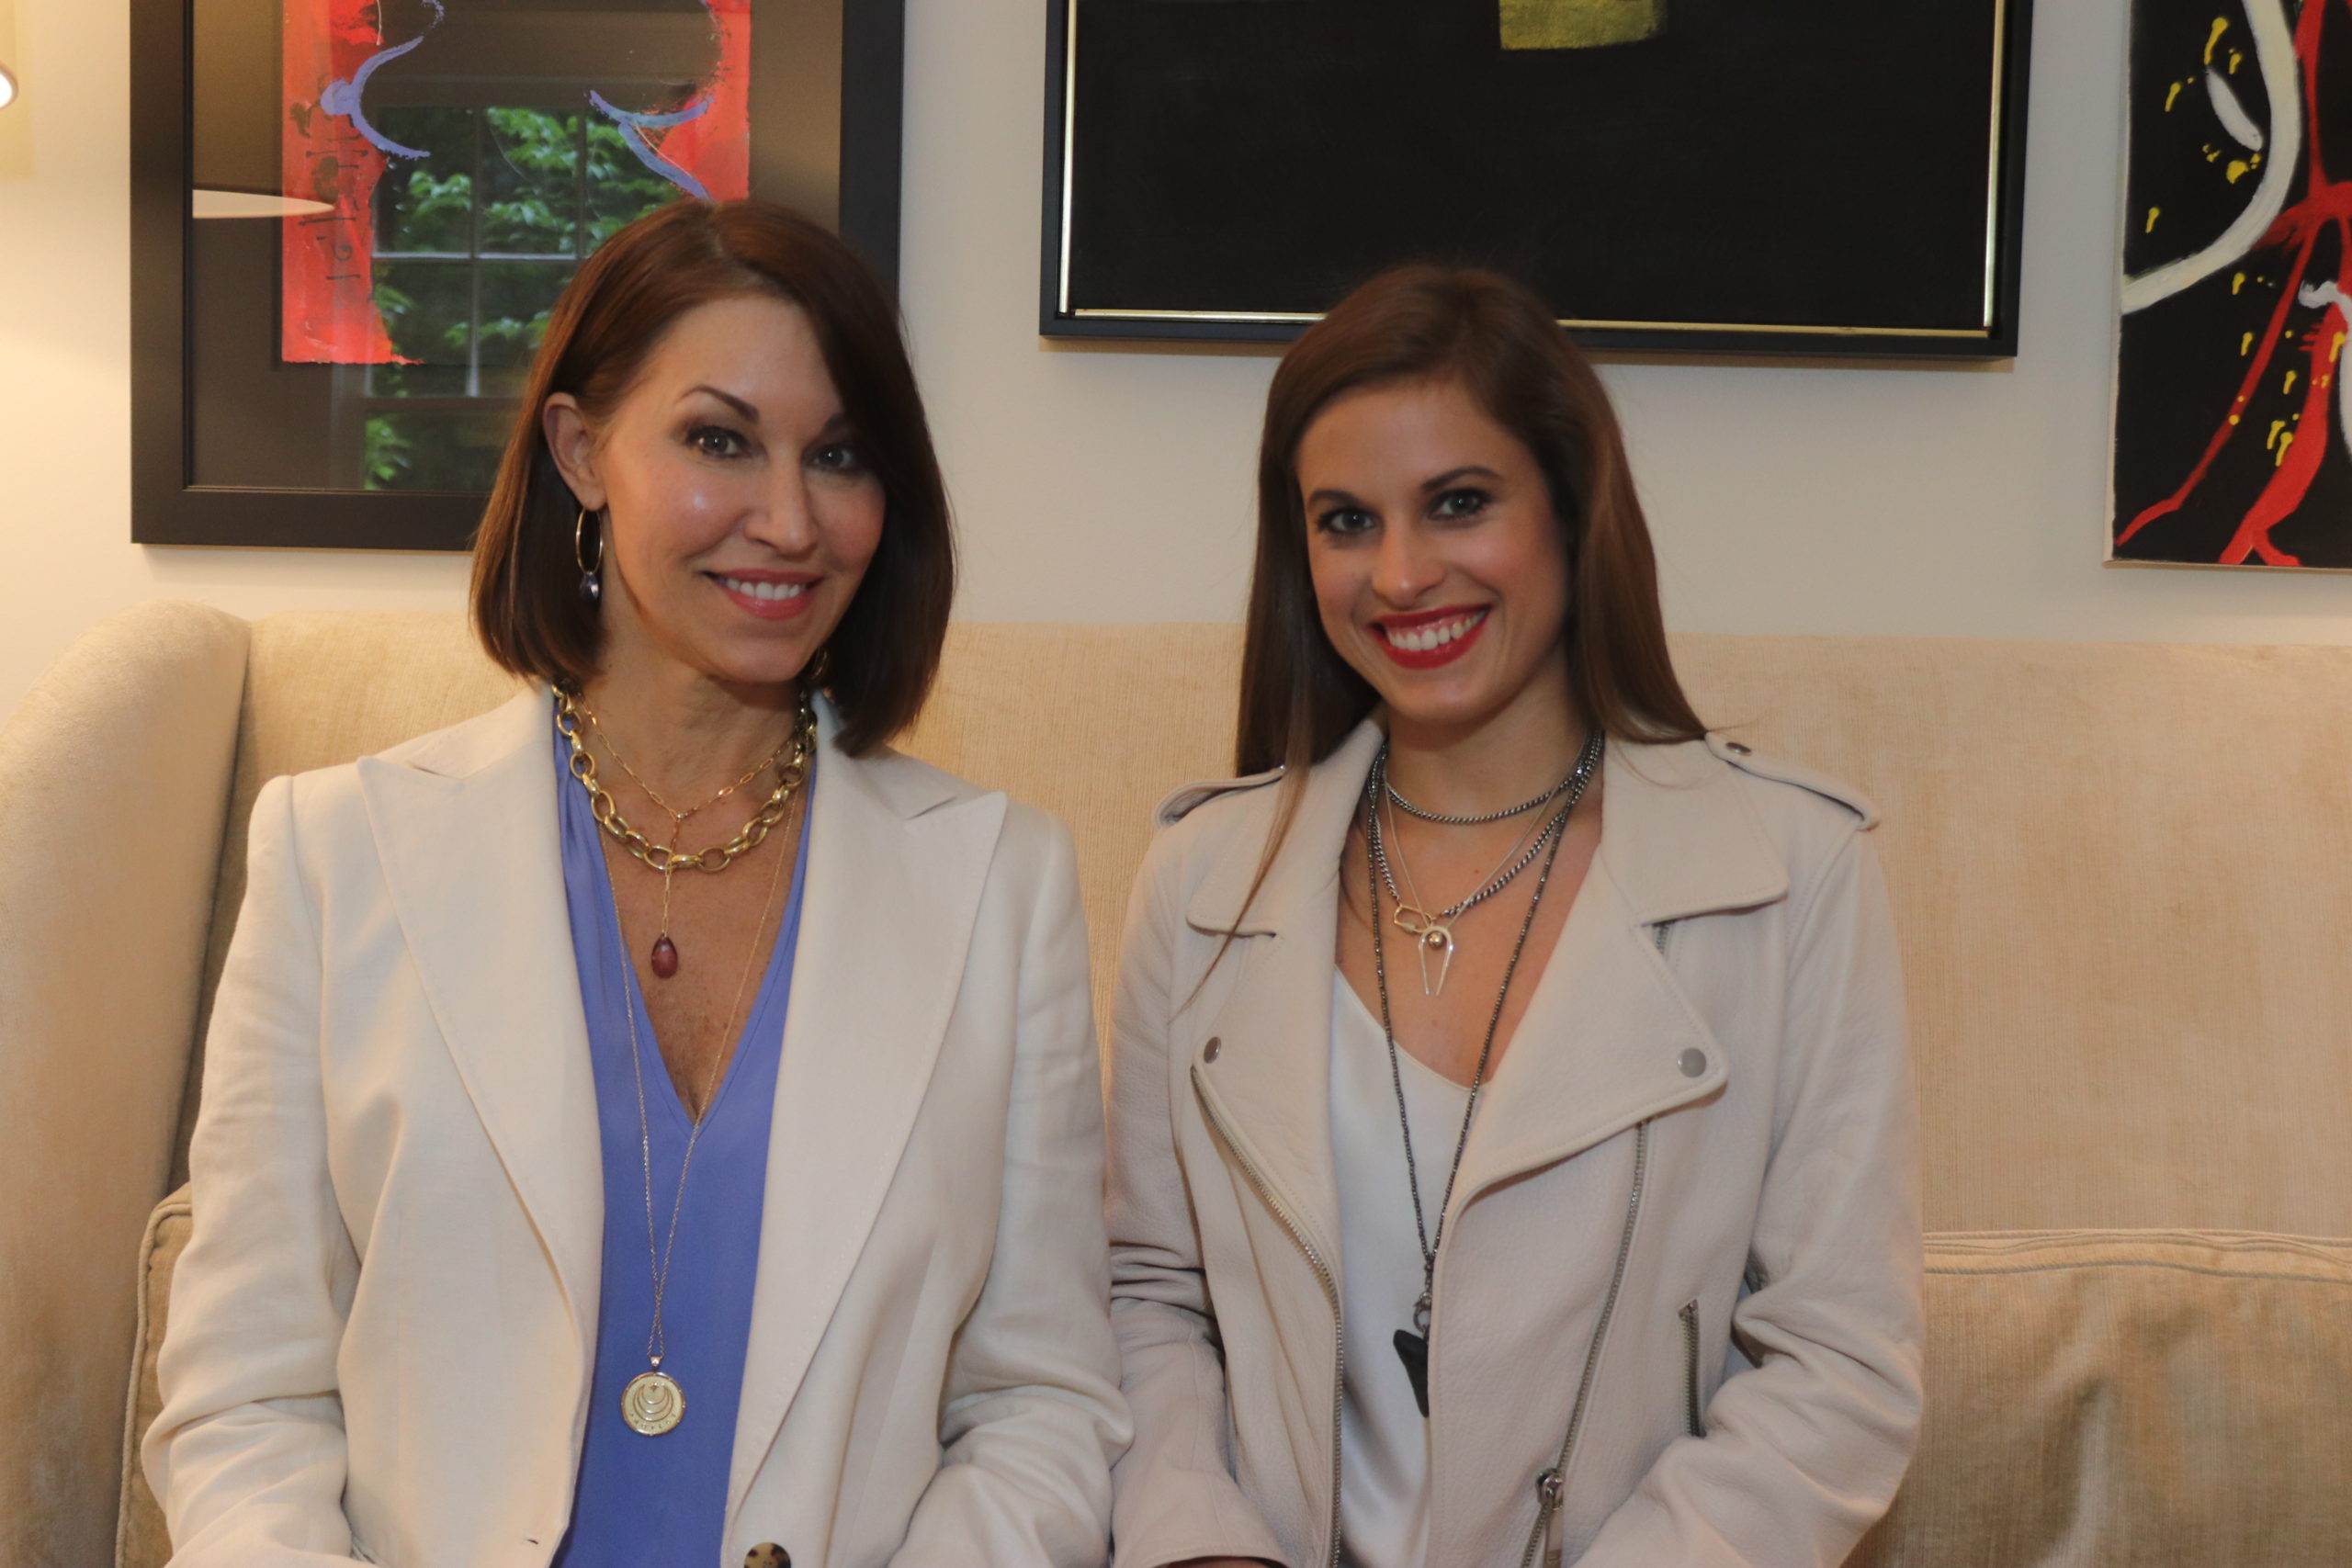 Two women both with brown hair sitting on a couch wearing layered necklaces: one wears a white blazer with a blue shirt and the other wears a cream colored leather jacket